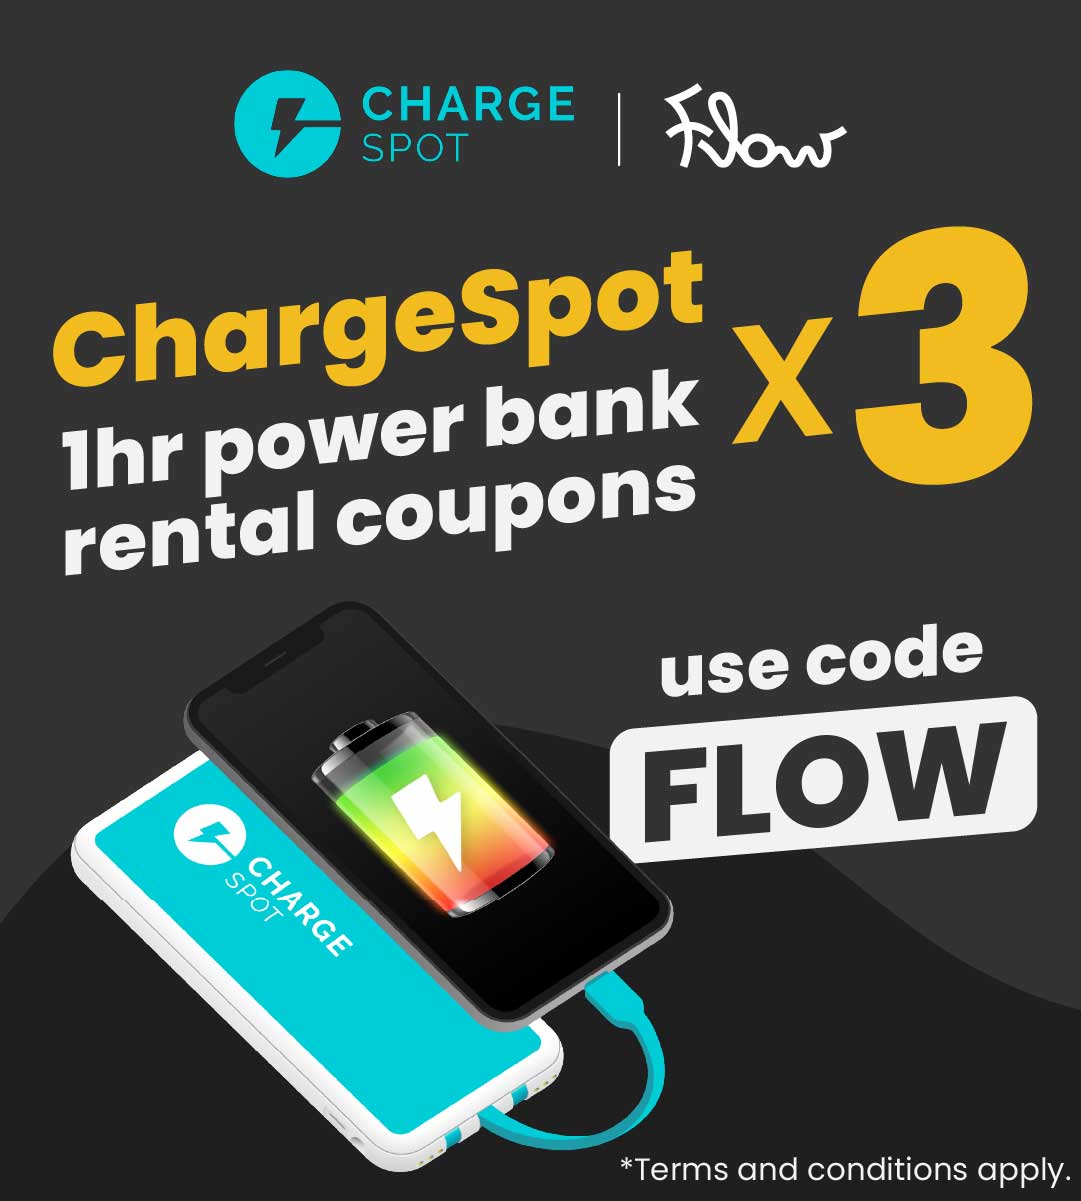 Flow Member Perks: Free ChargeSpot 1H Power Bank Rental Coupons x3